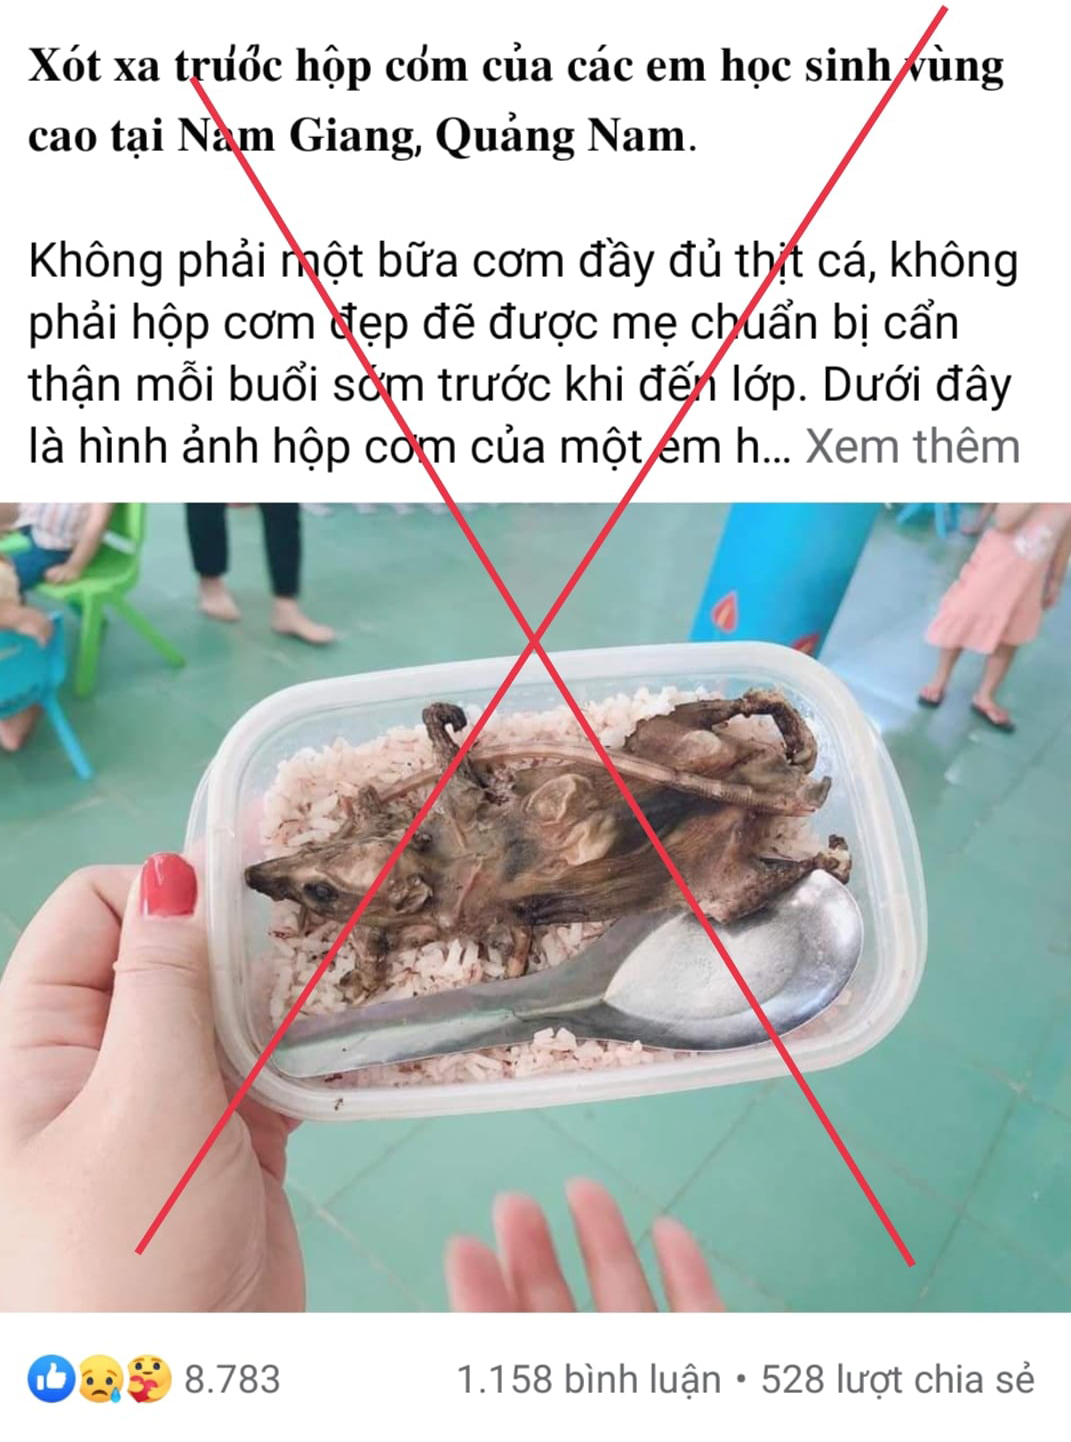 Old photo causes misunderstanding of central Vietnamese school giving students rat meat meals